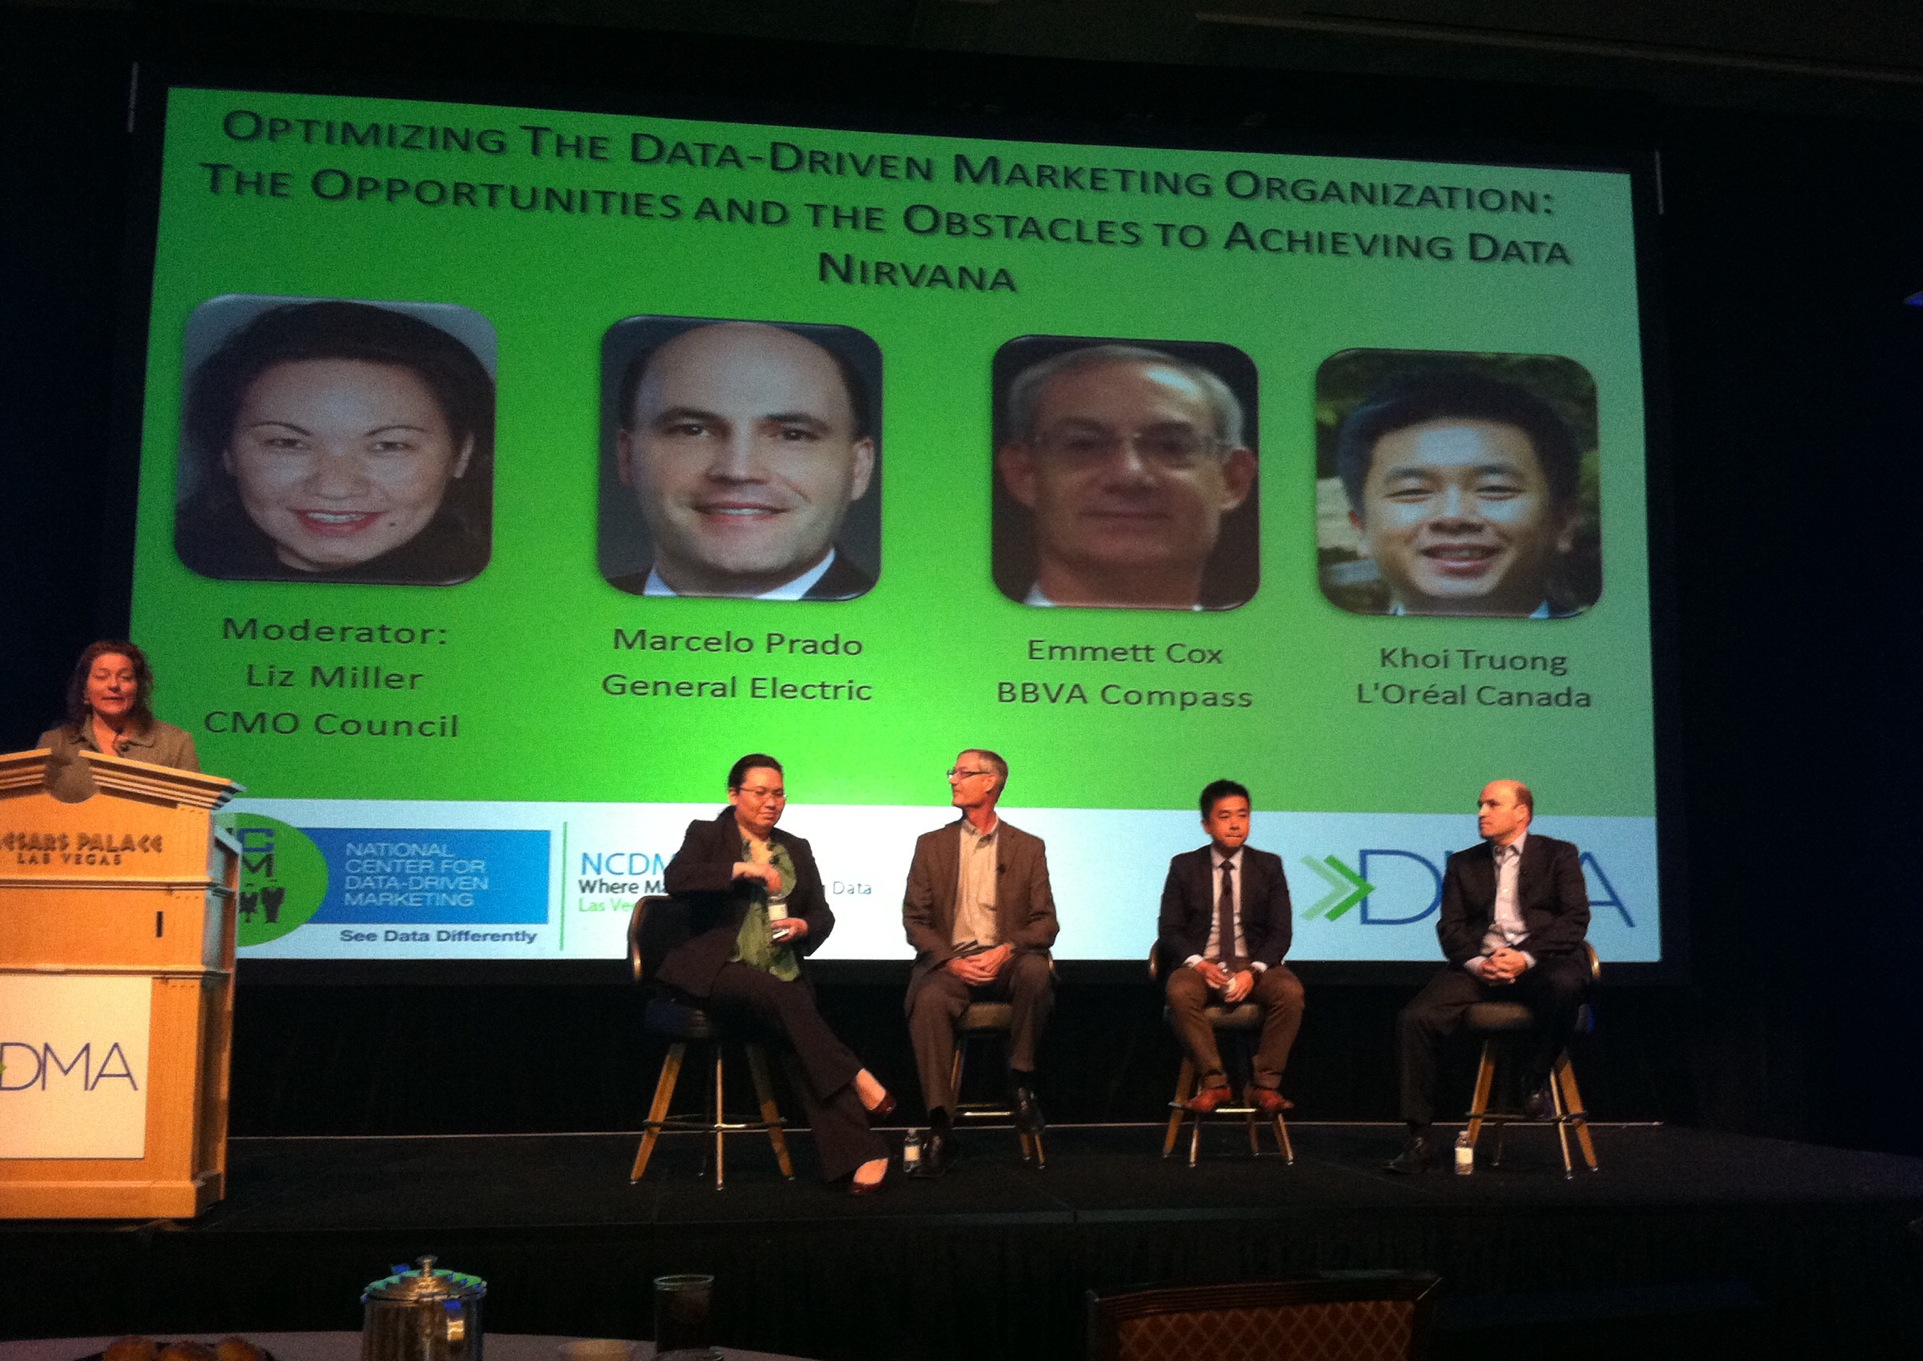 The lunch panel at NCDM included executives from BBVA Compass, L'Oreal Canada, GE Measurement & Control and the CMO Council.